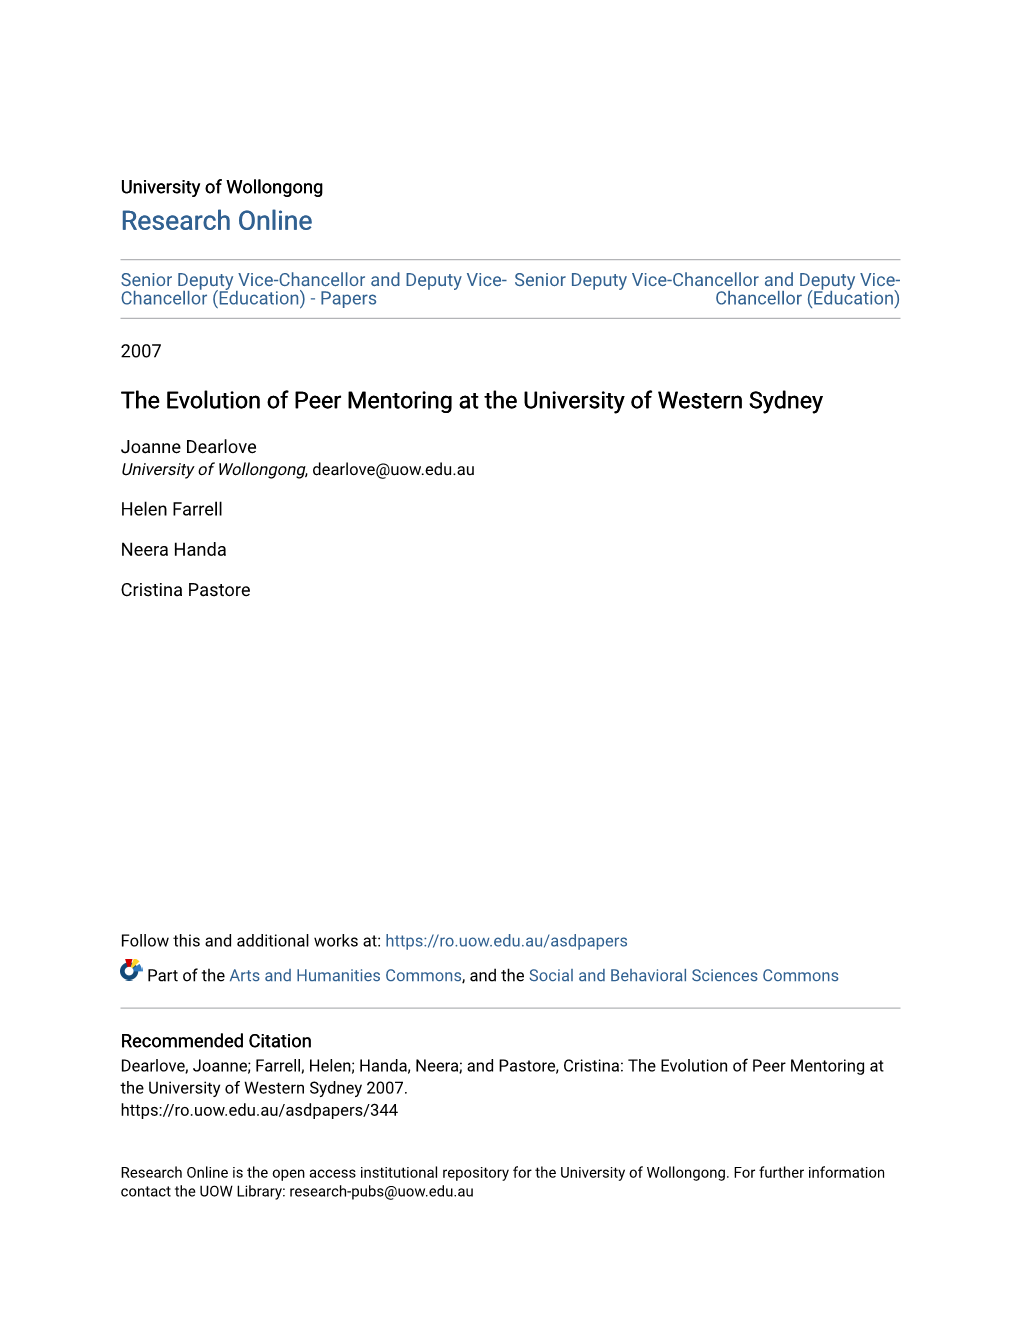 The Evolution of Peer Mentoring at the University of Western Sydney